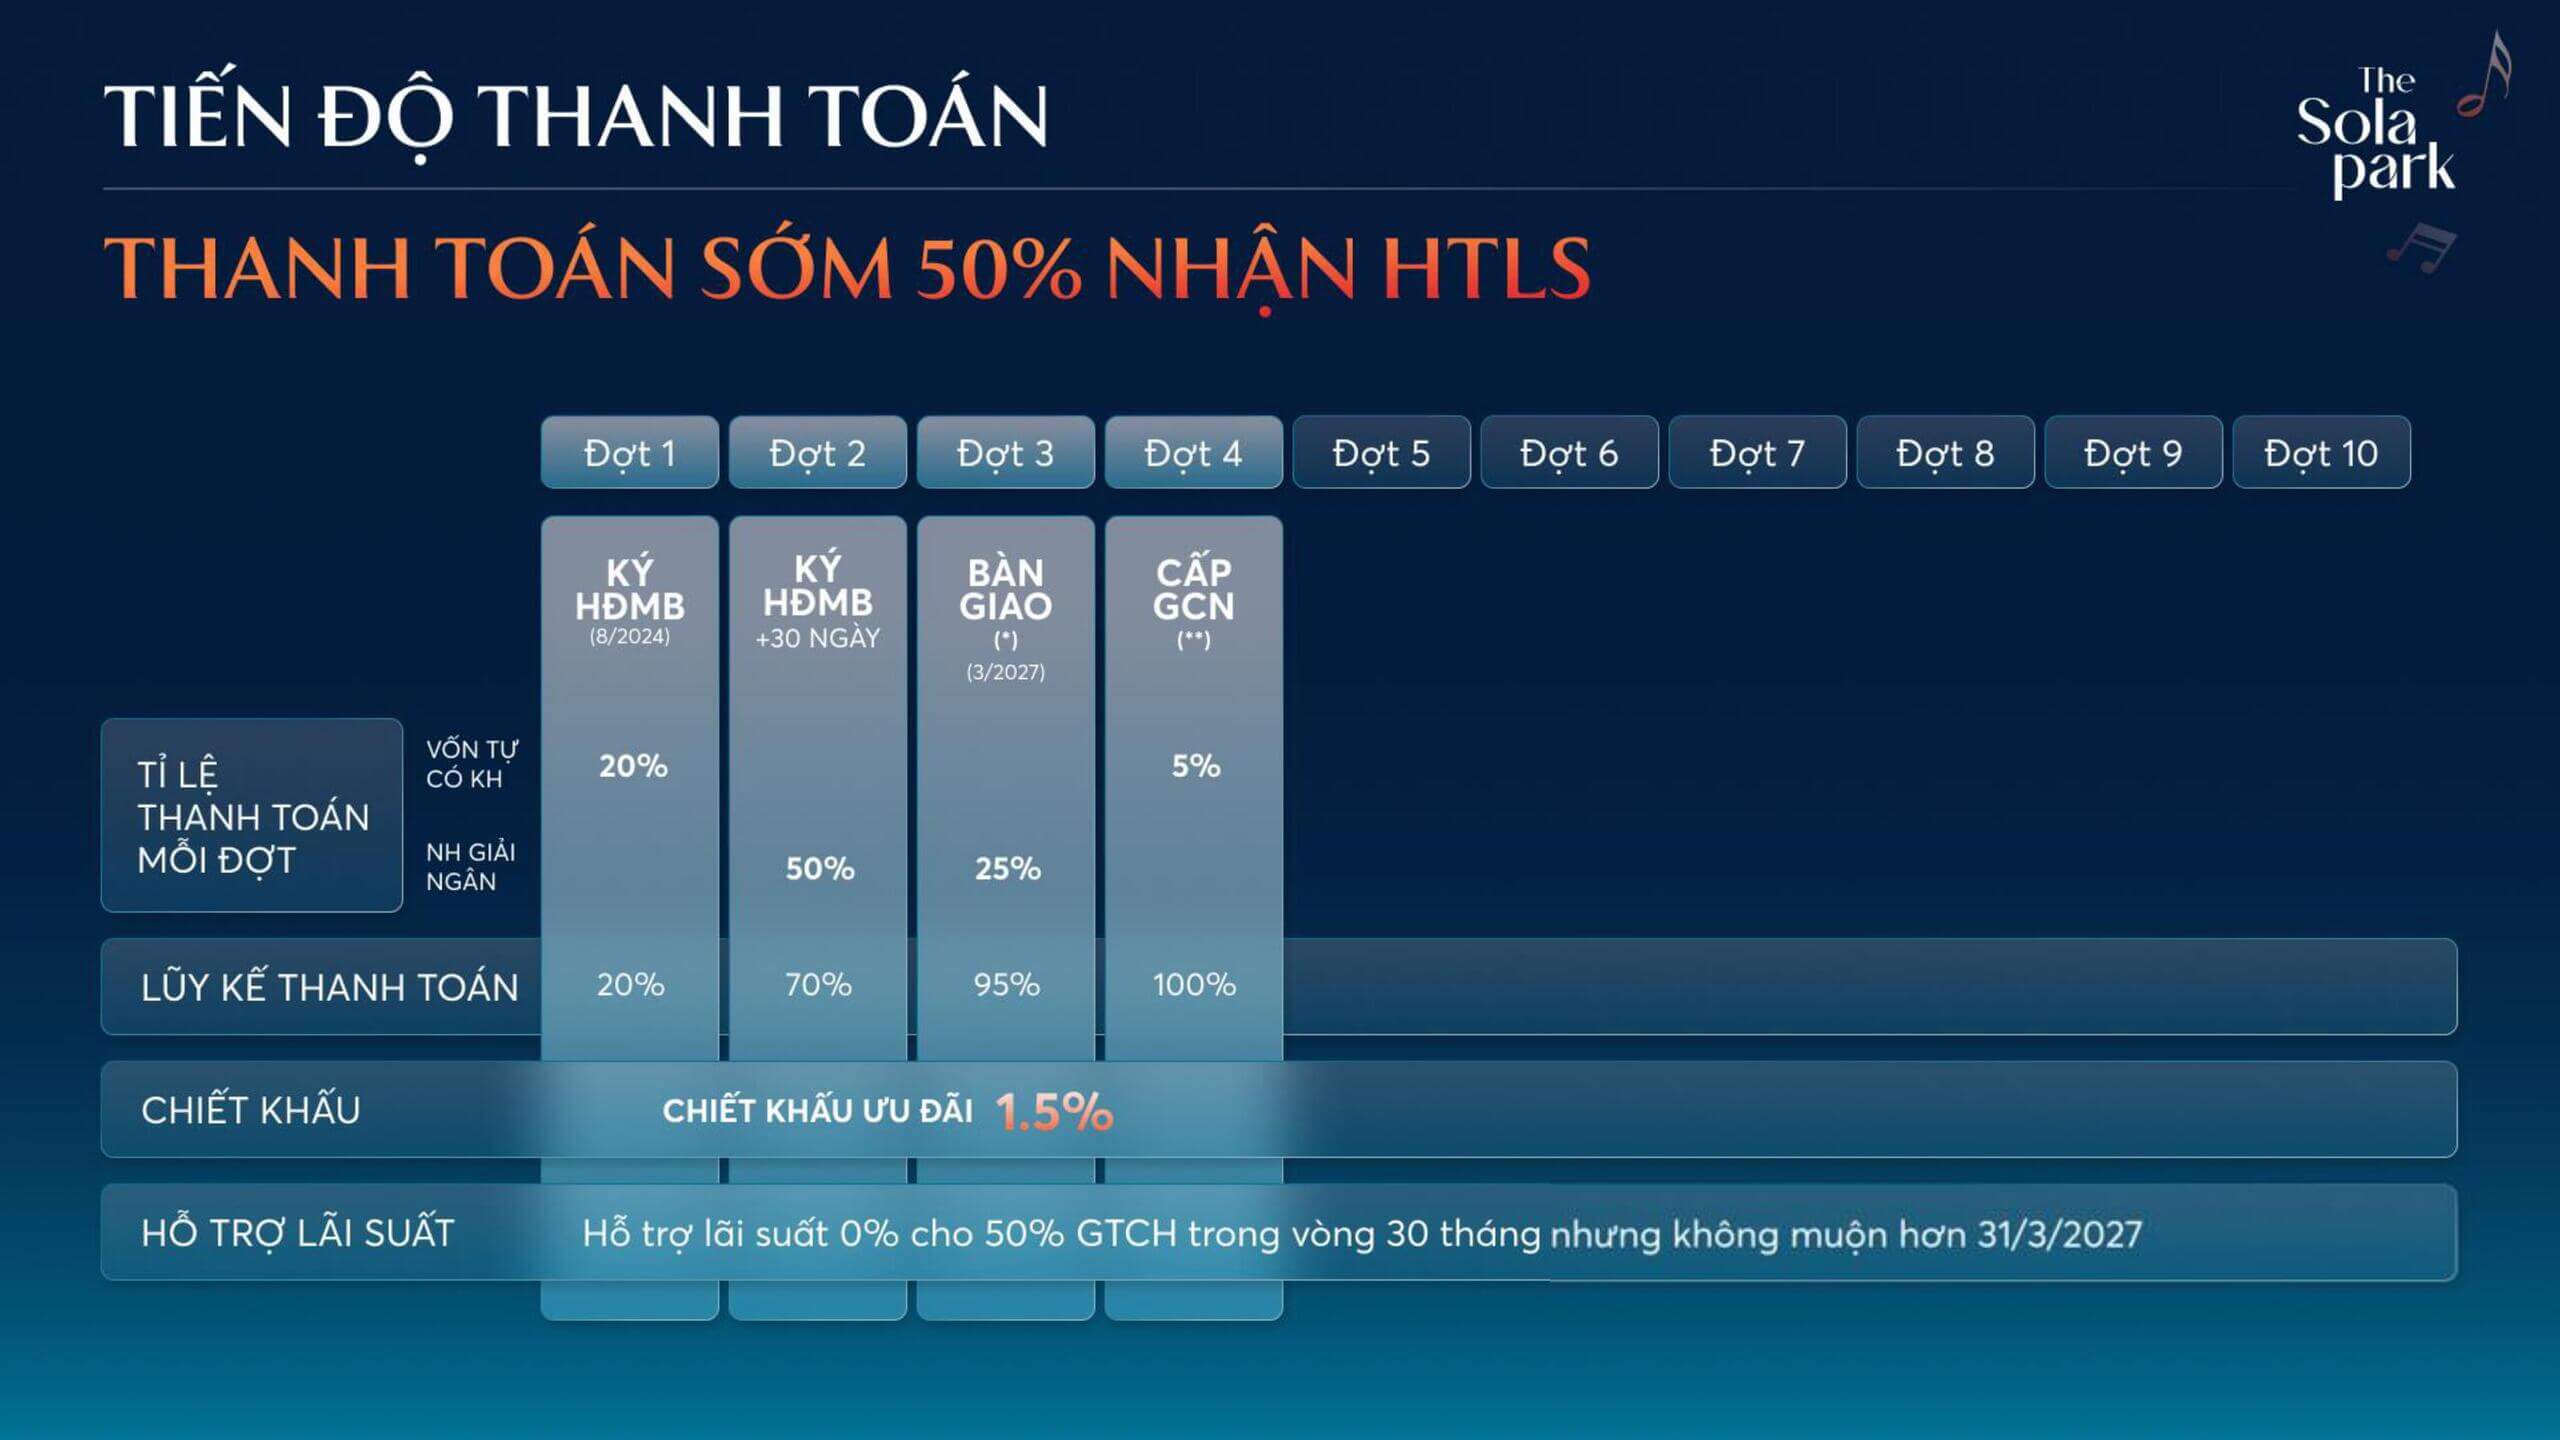 thanh-toan-som-50